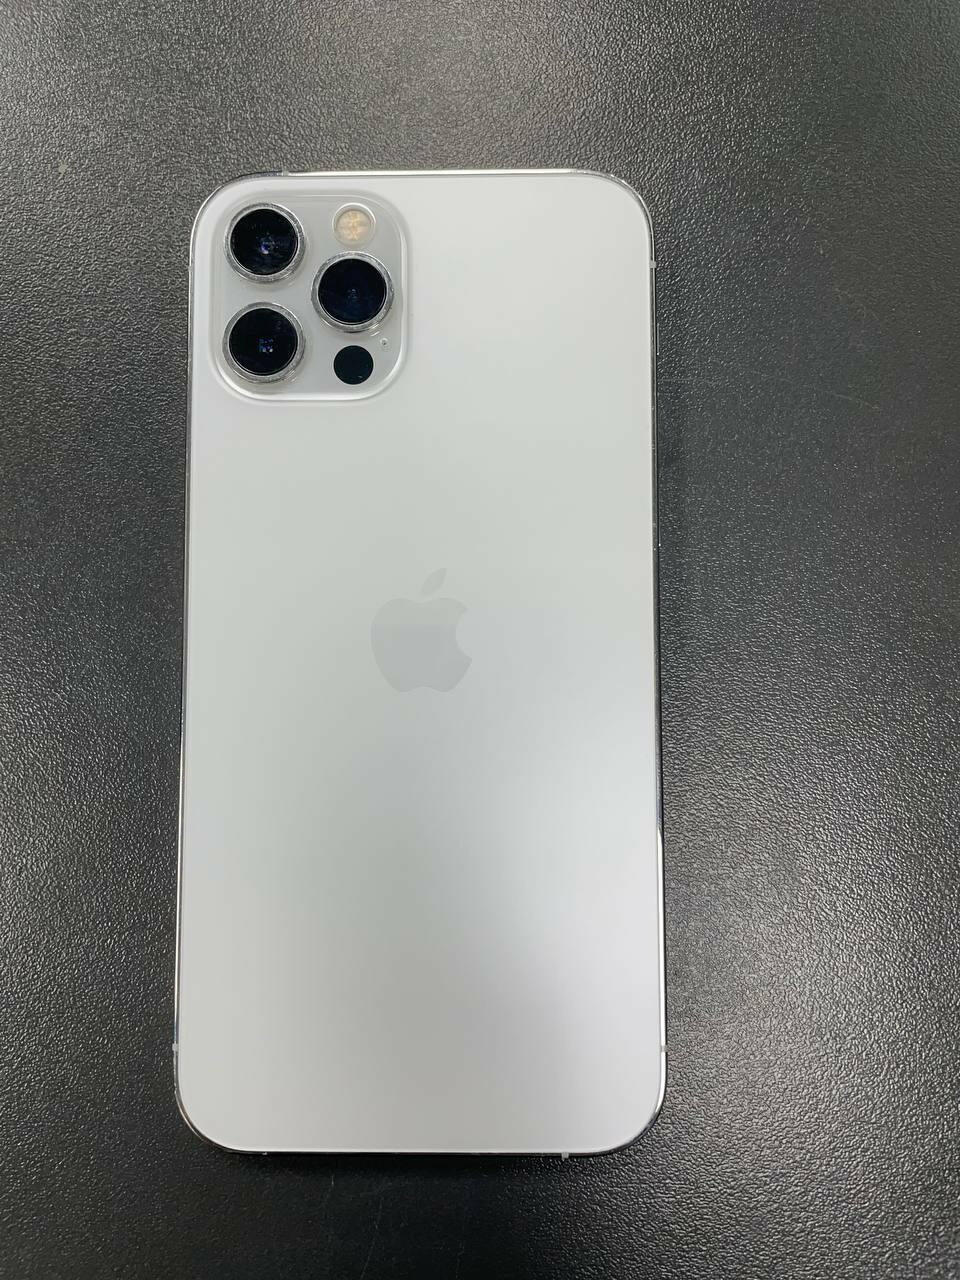 iPhone 12 Pro white 128GB no box or charger